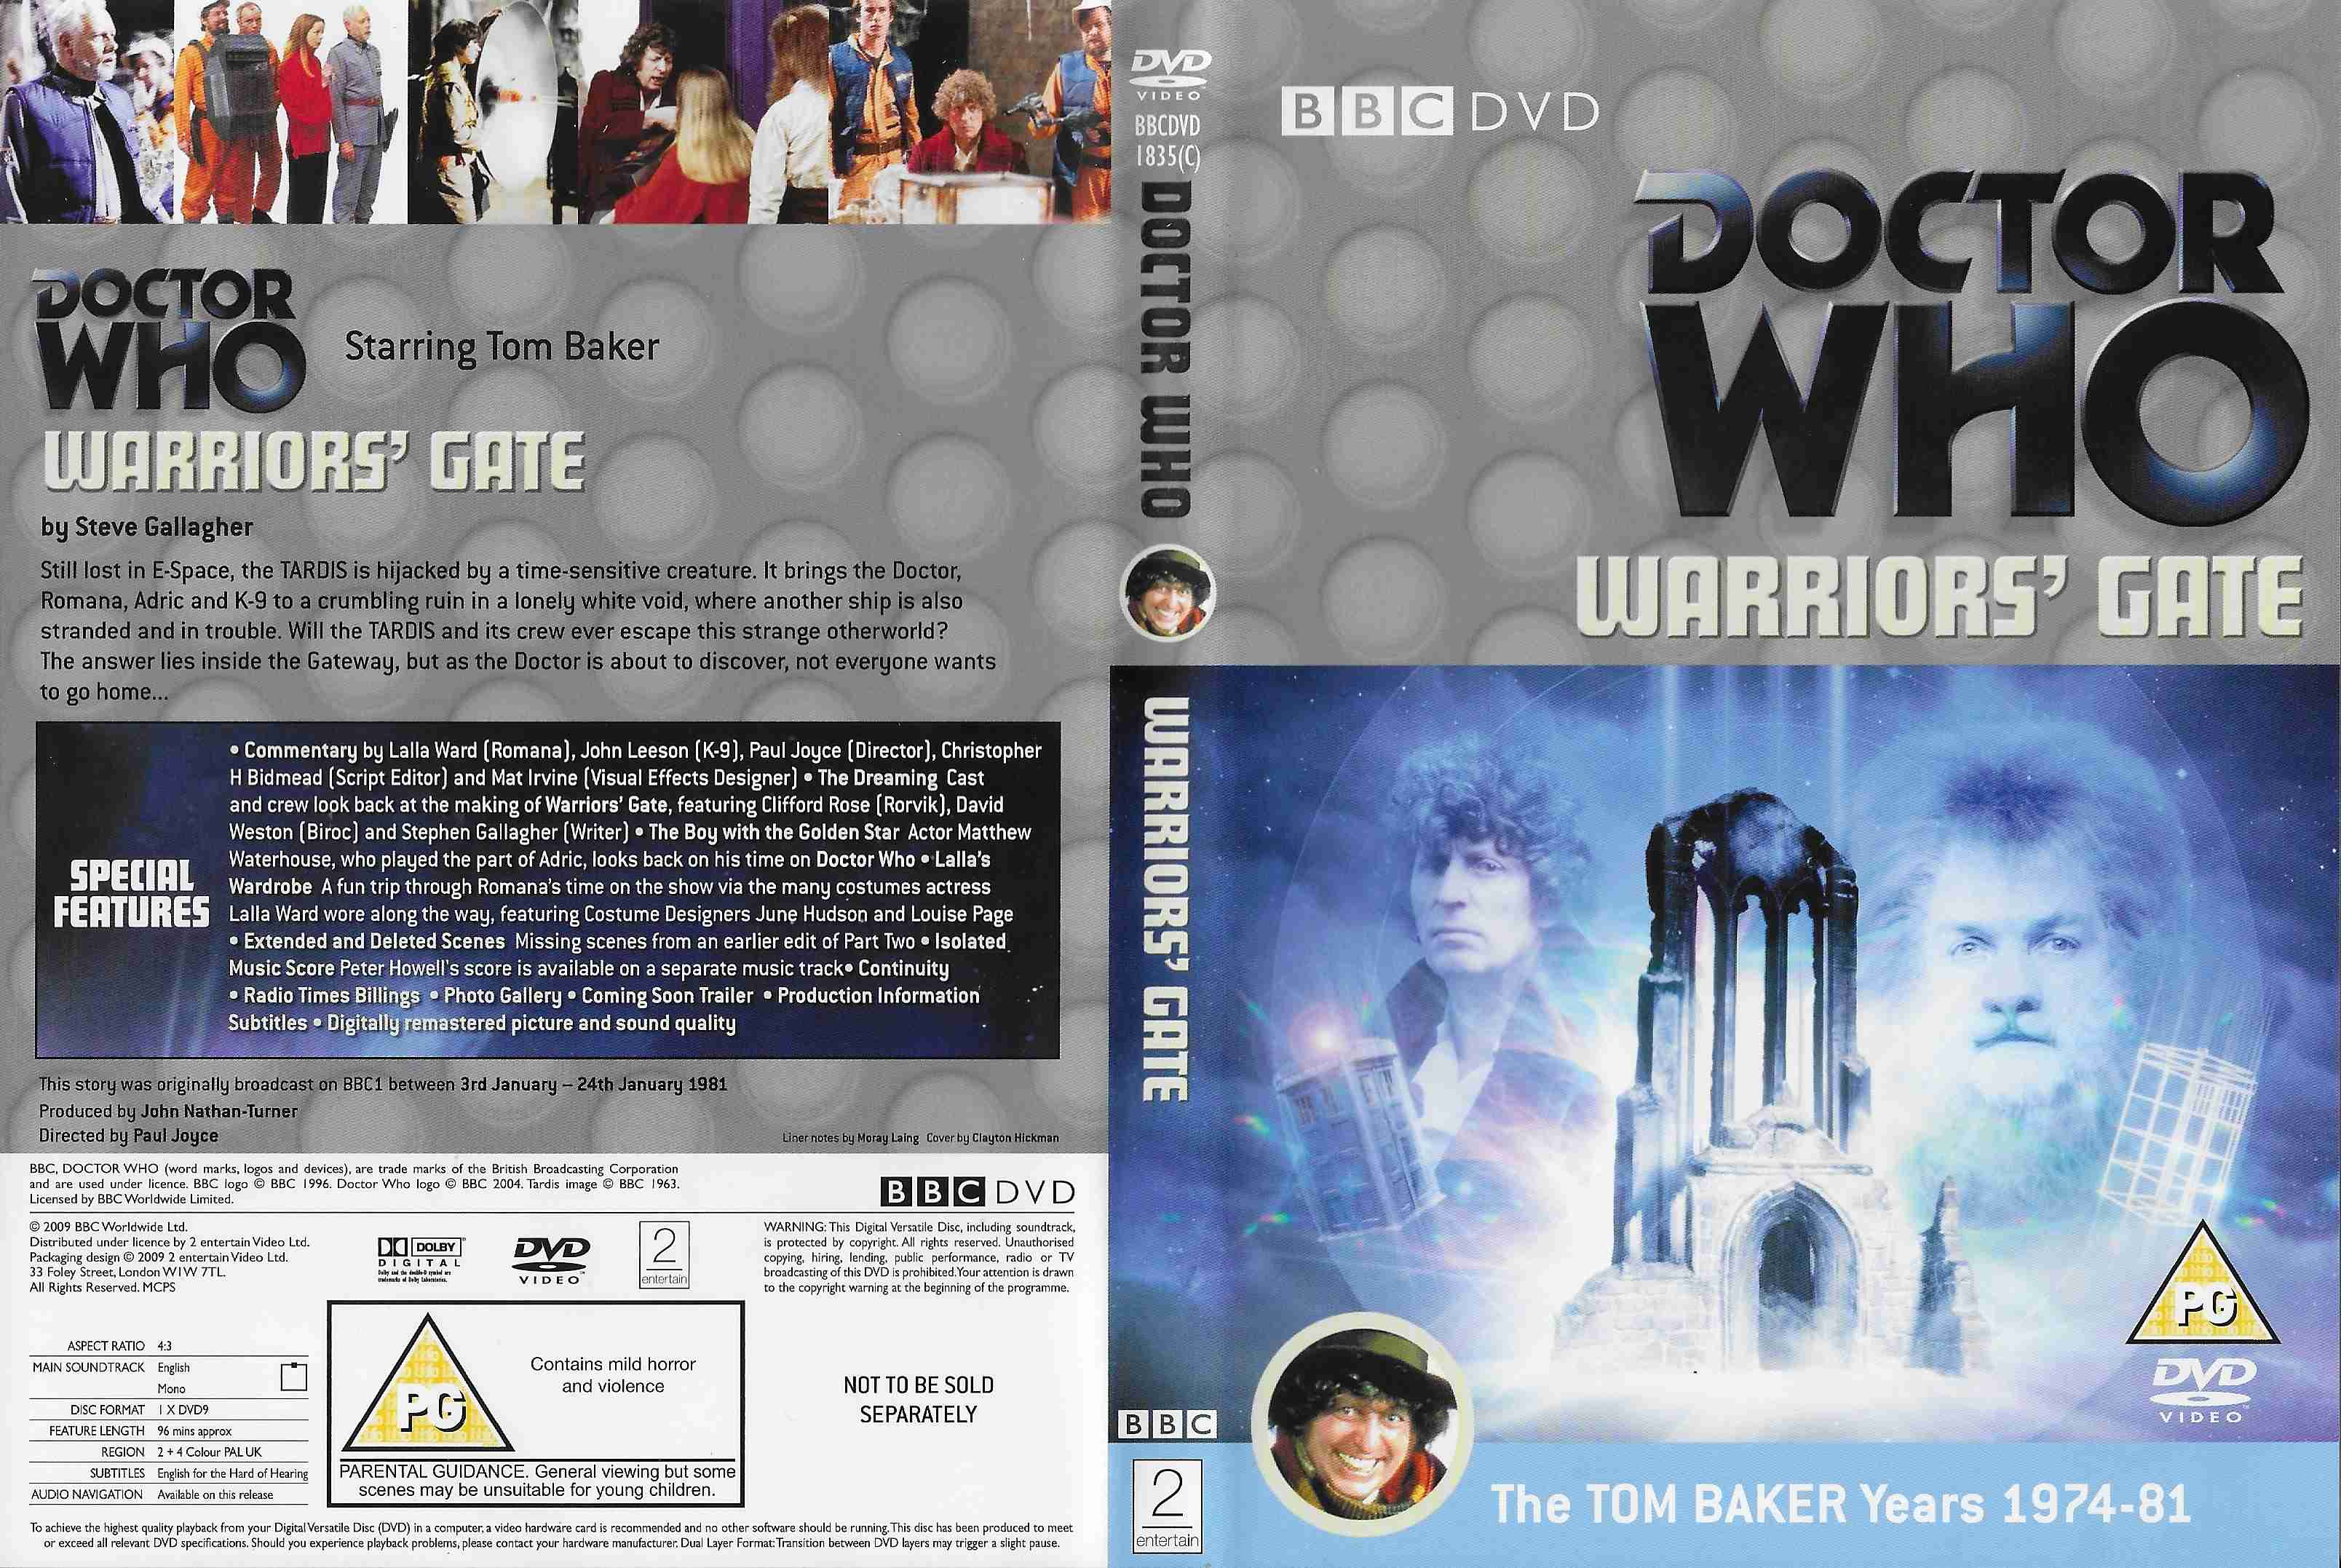 Picture of BBCDVD 1835C Doctor Who - Warriors' gate by artist Steve Gallagher from the BBC records and Tapes library